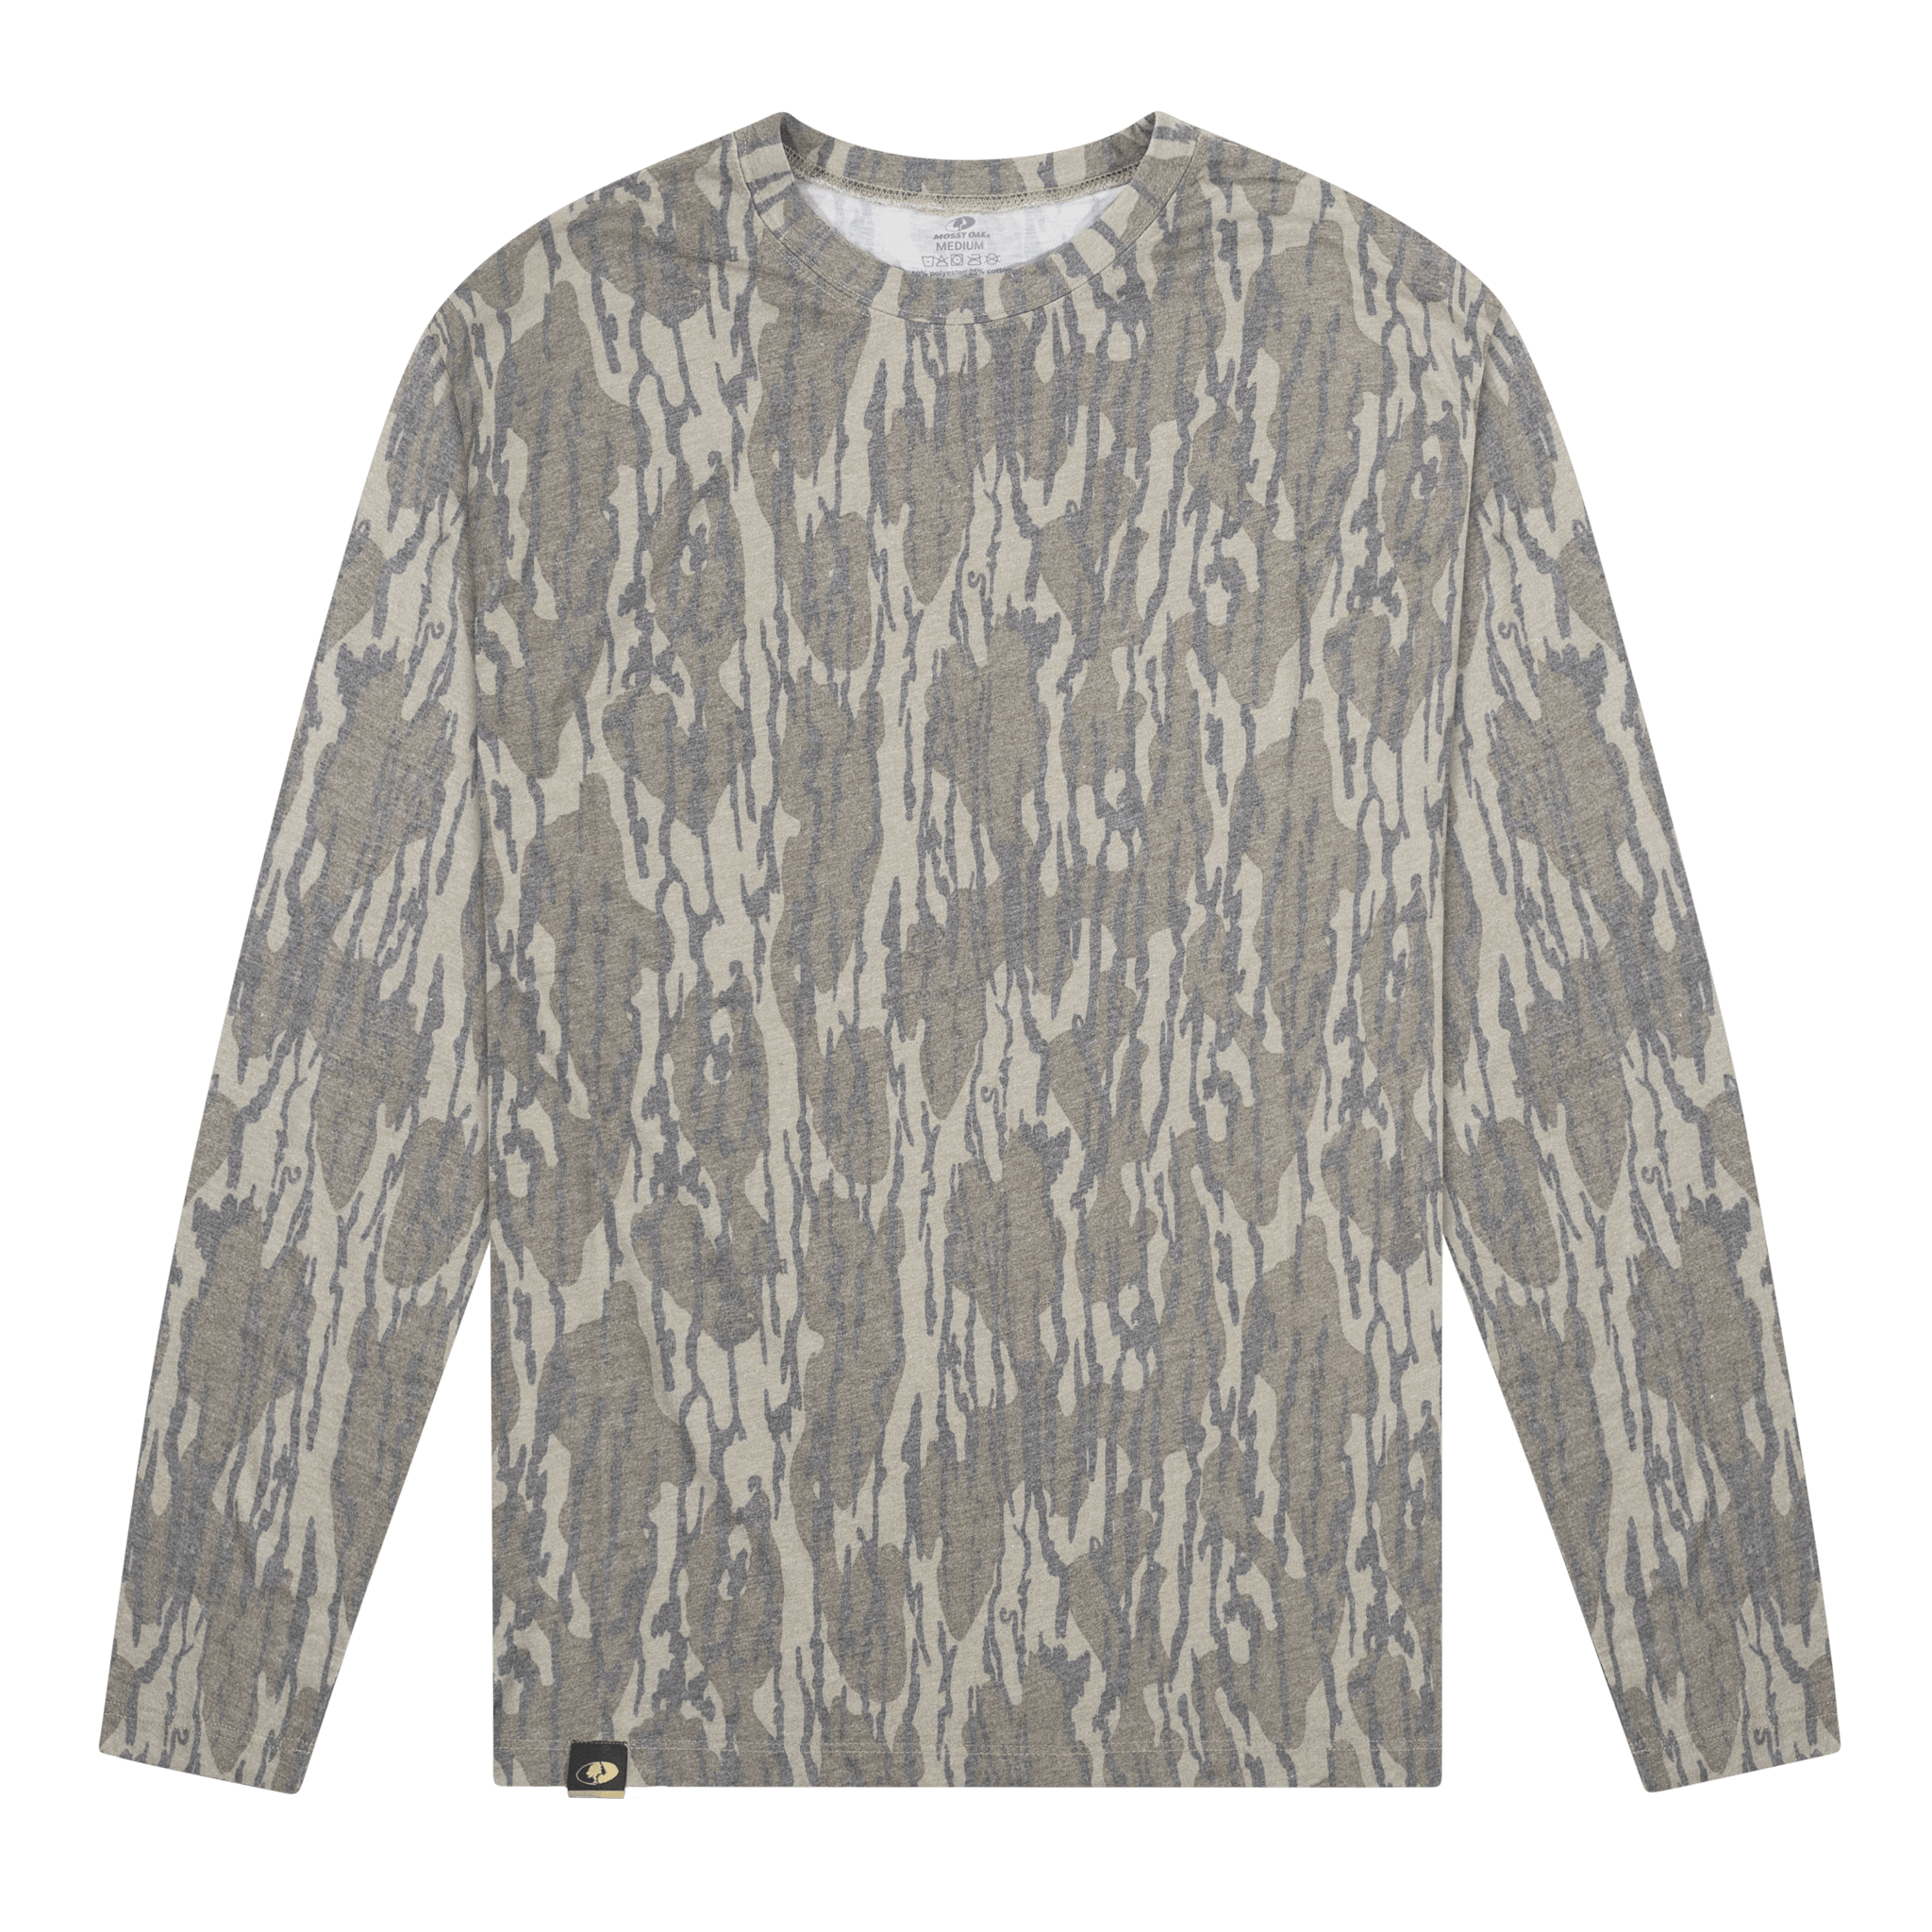 Mossy Oak Washed Out Long Sleeve Camo Tee – The Mossy Oak Store